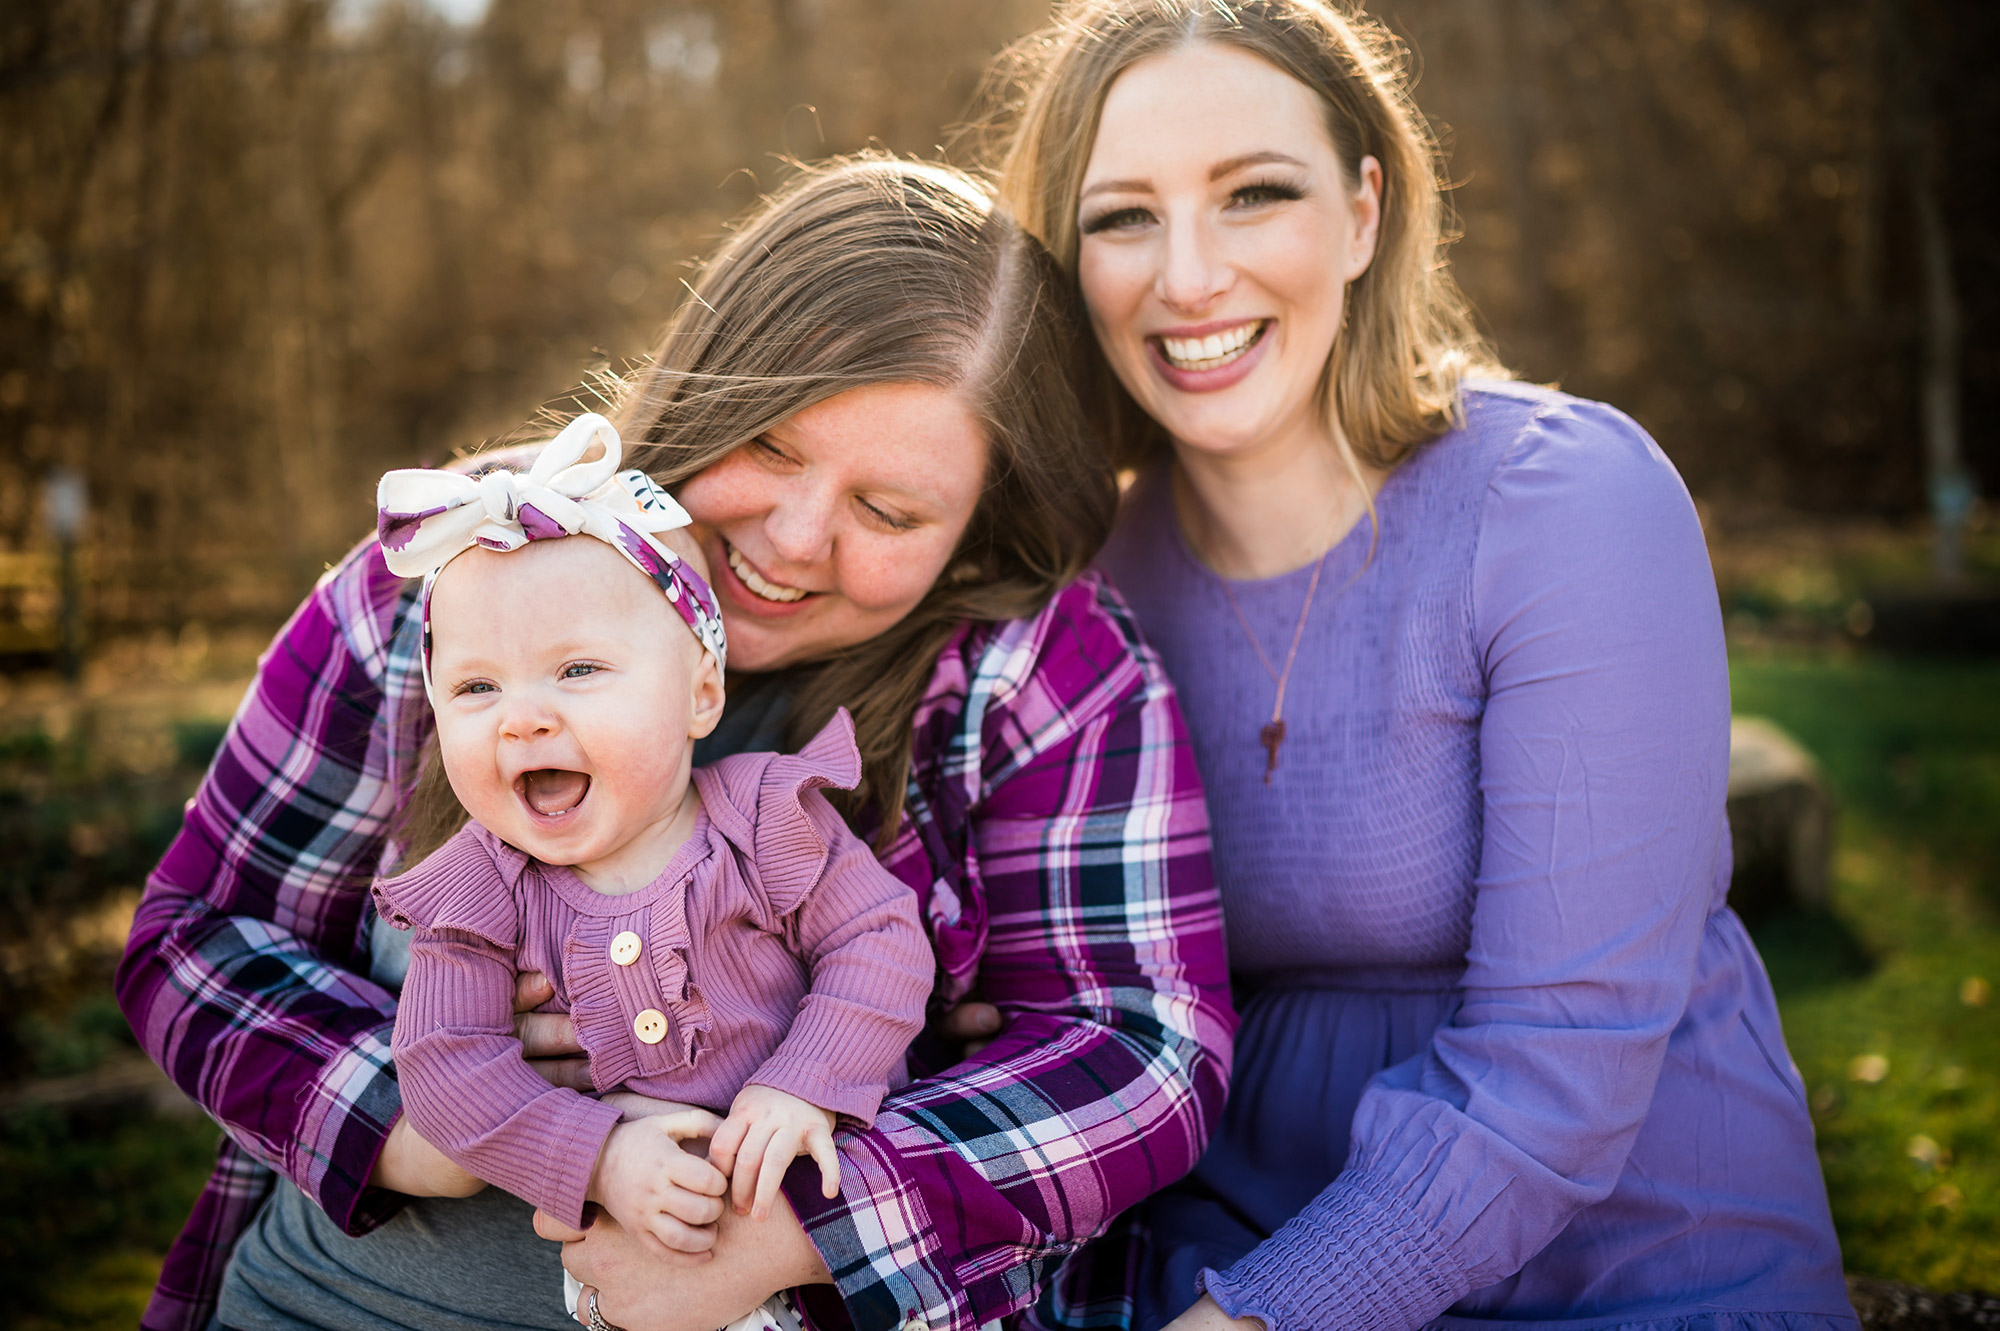 A happy family moment with two mothers, one holding a laughing baby wearing a bow.